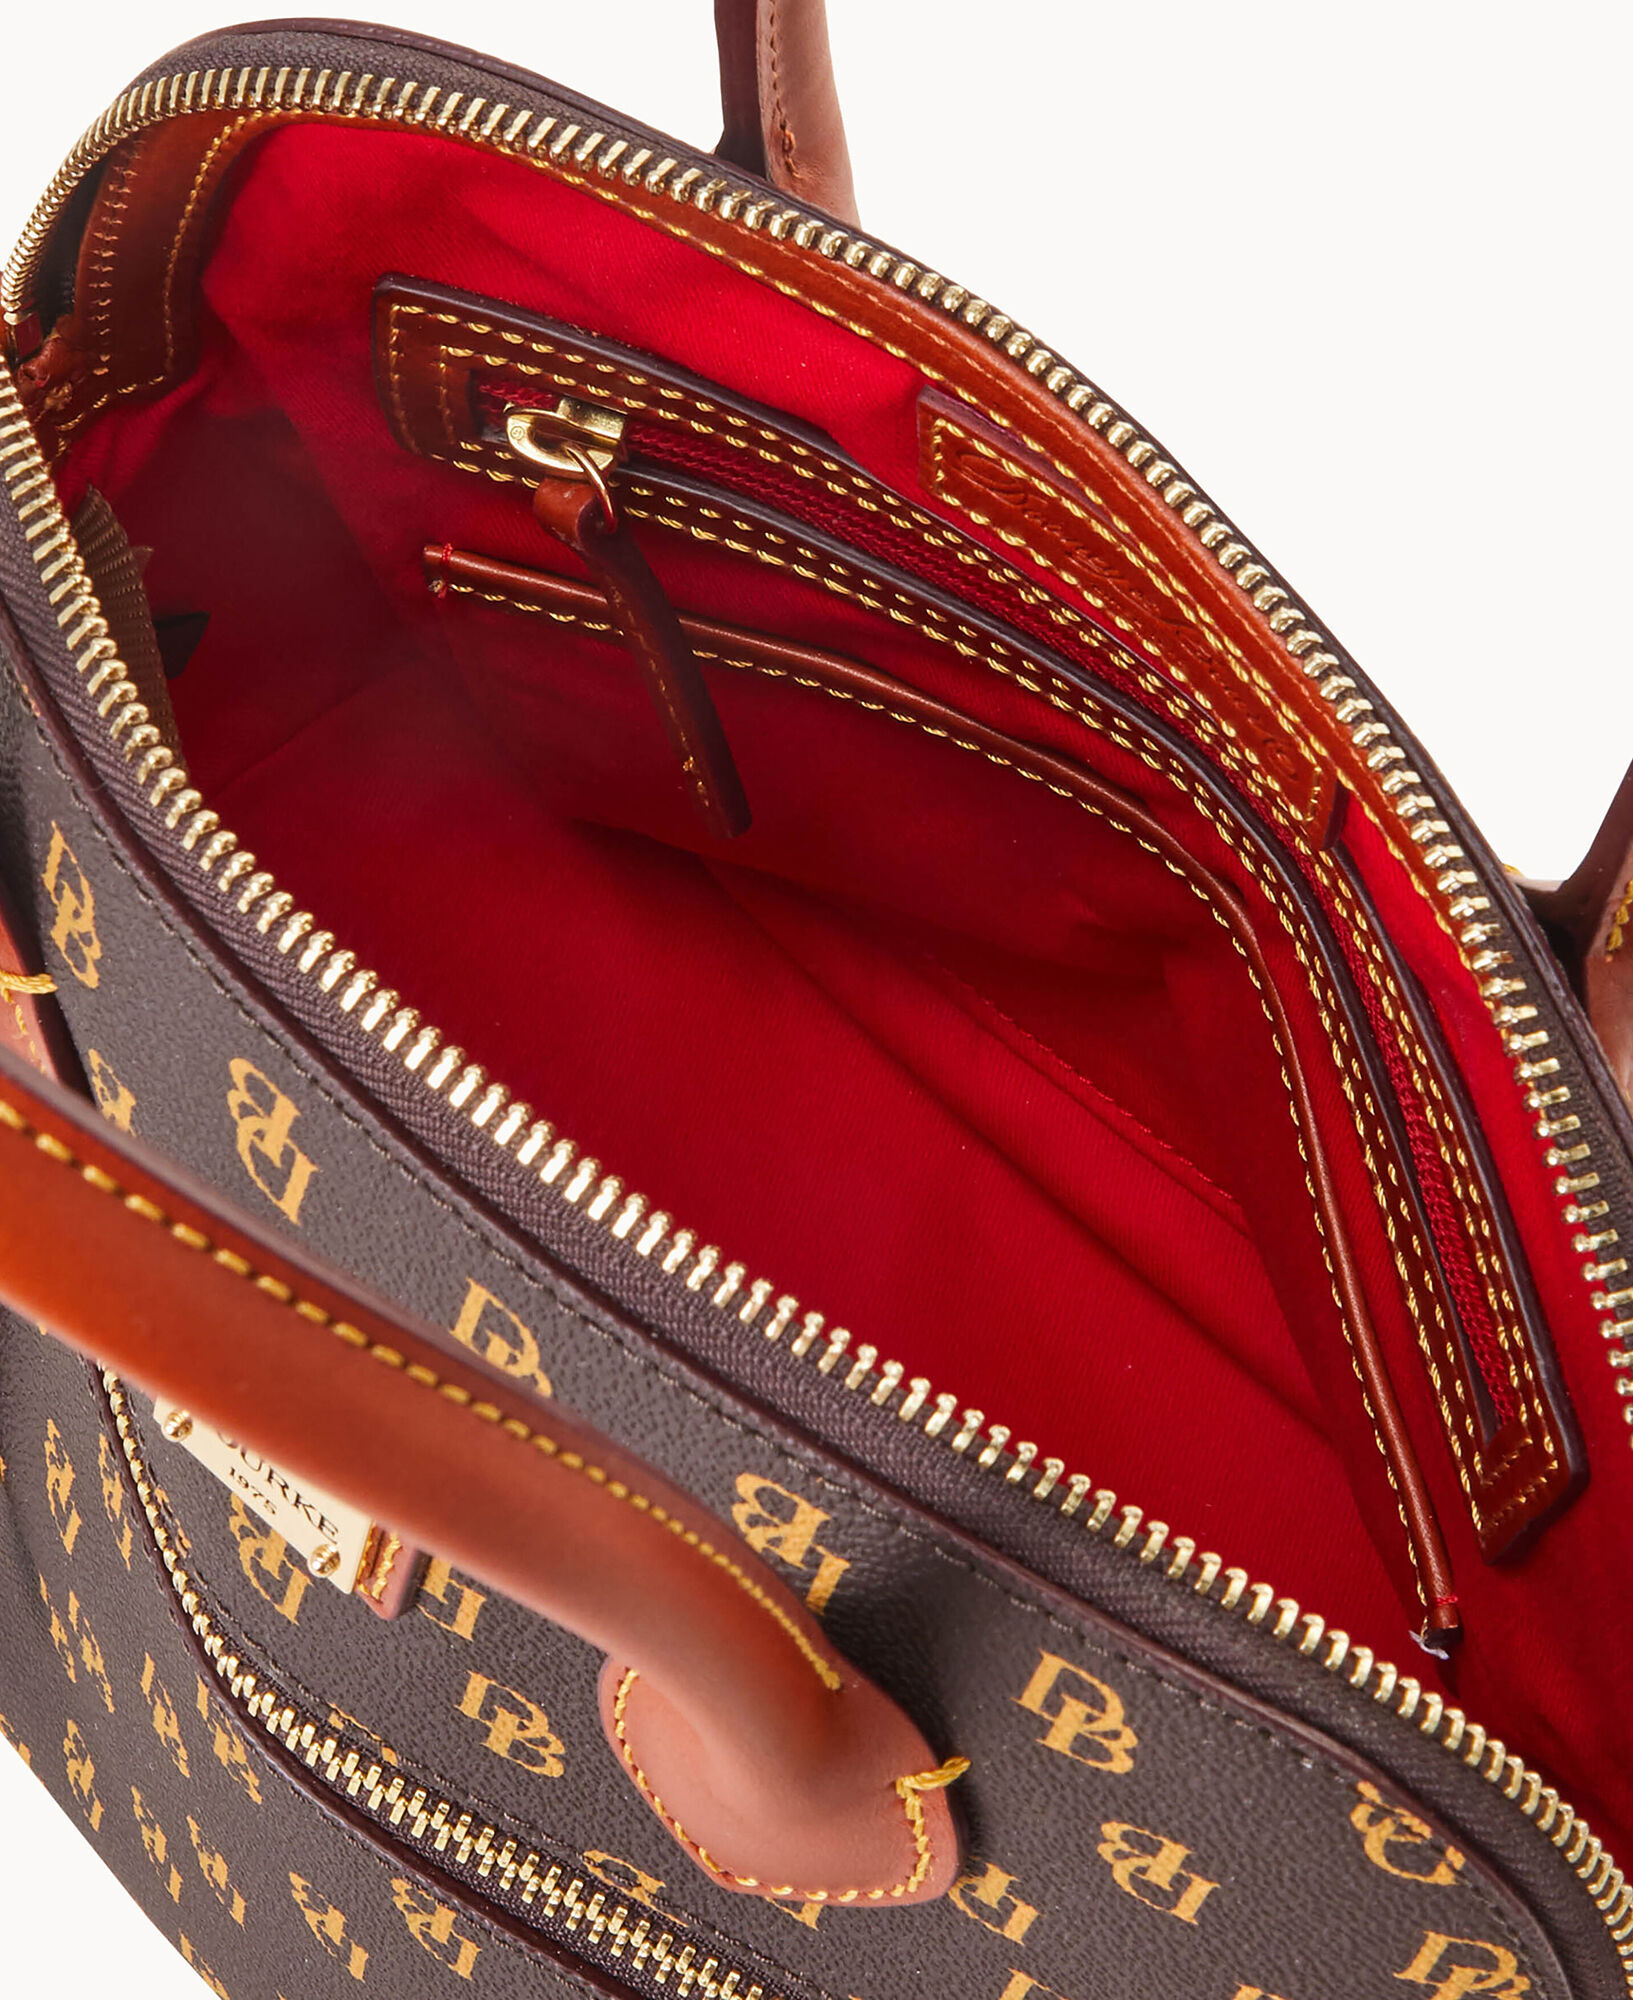 Louis Vuitton puts the red and black flag on bags, staggering